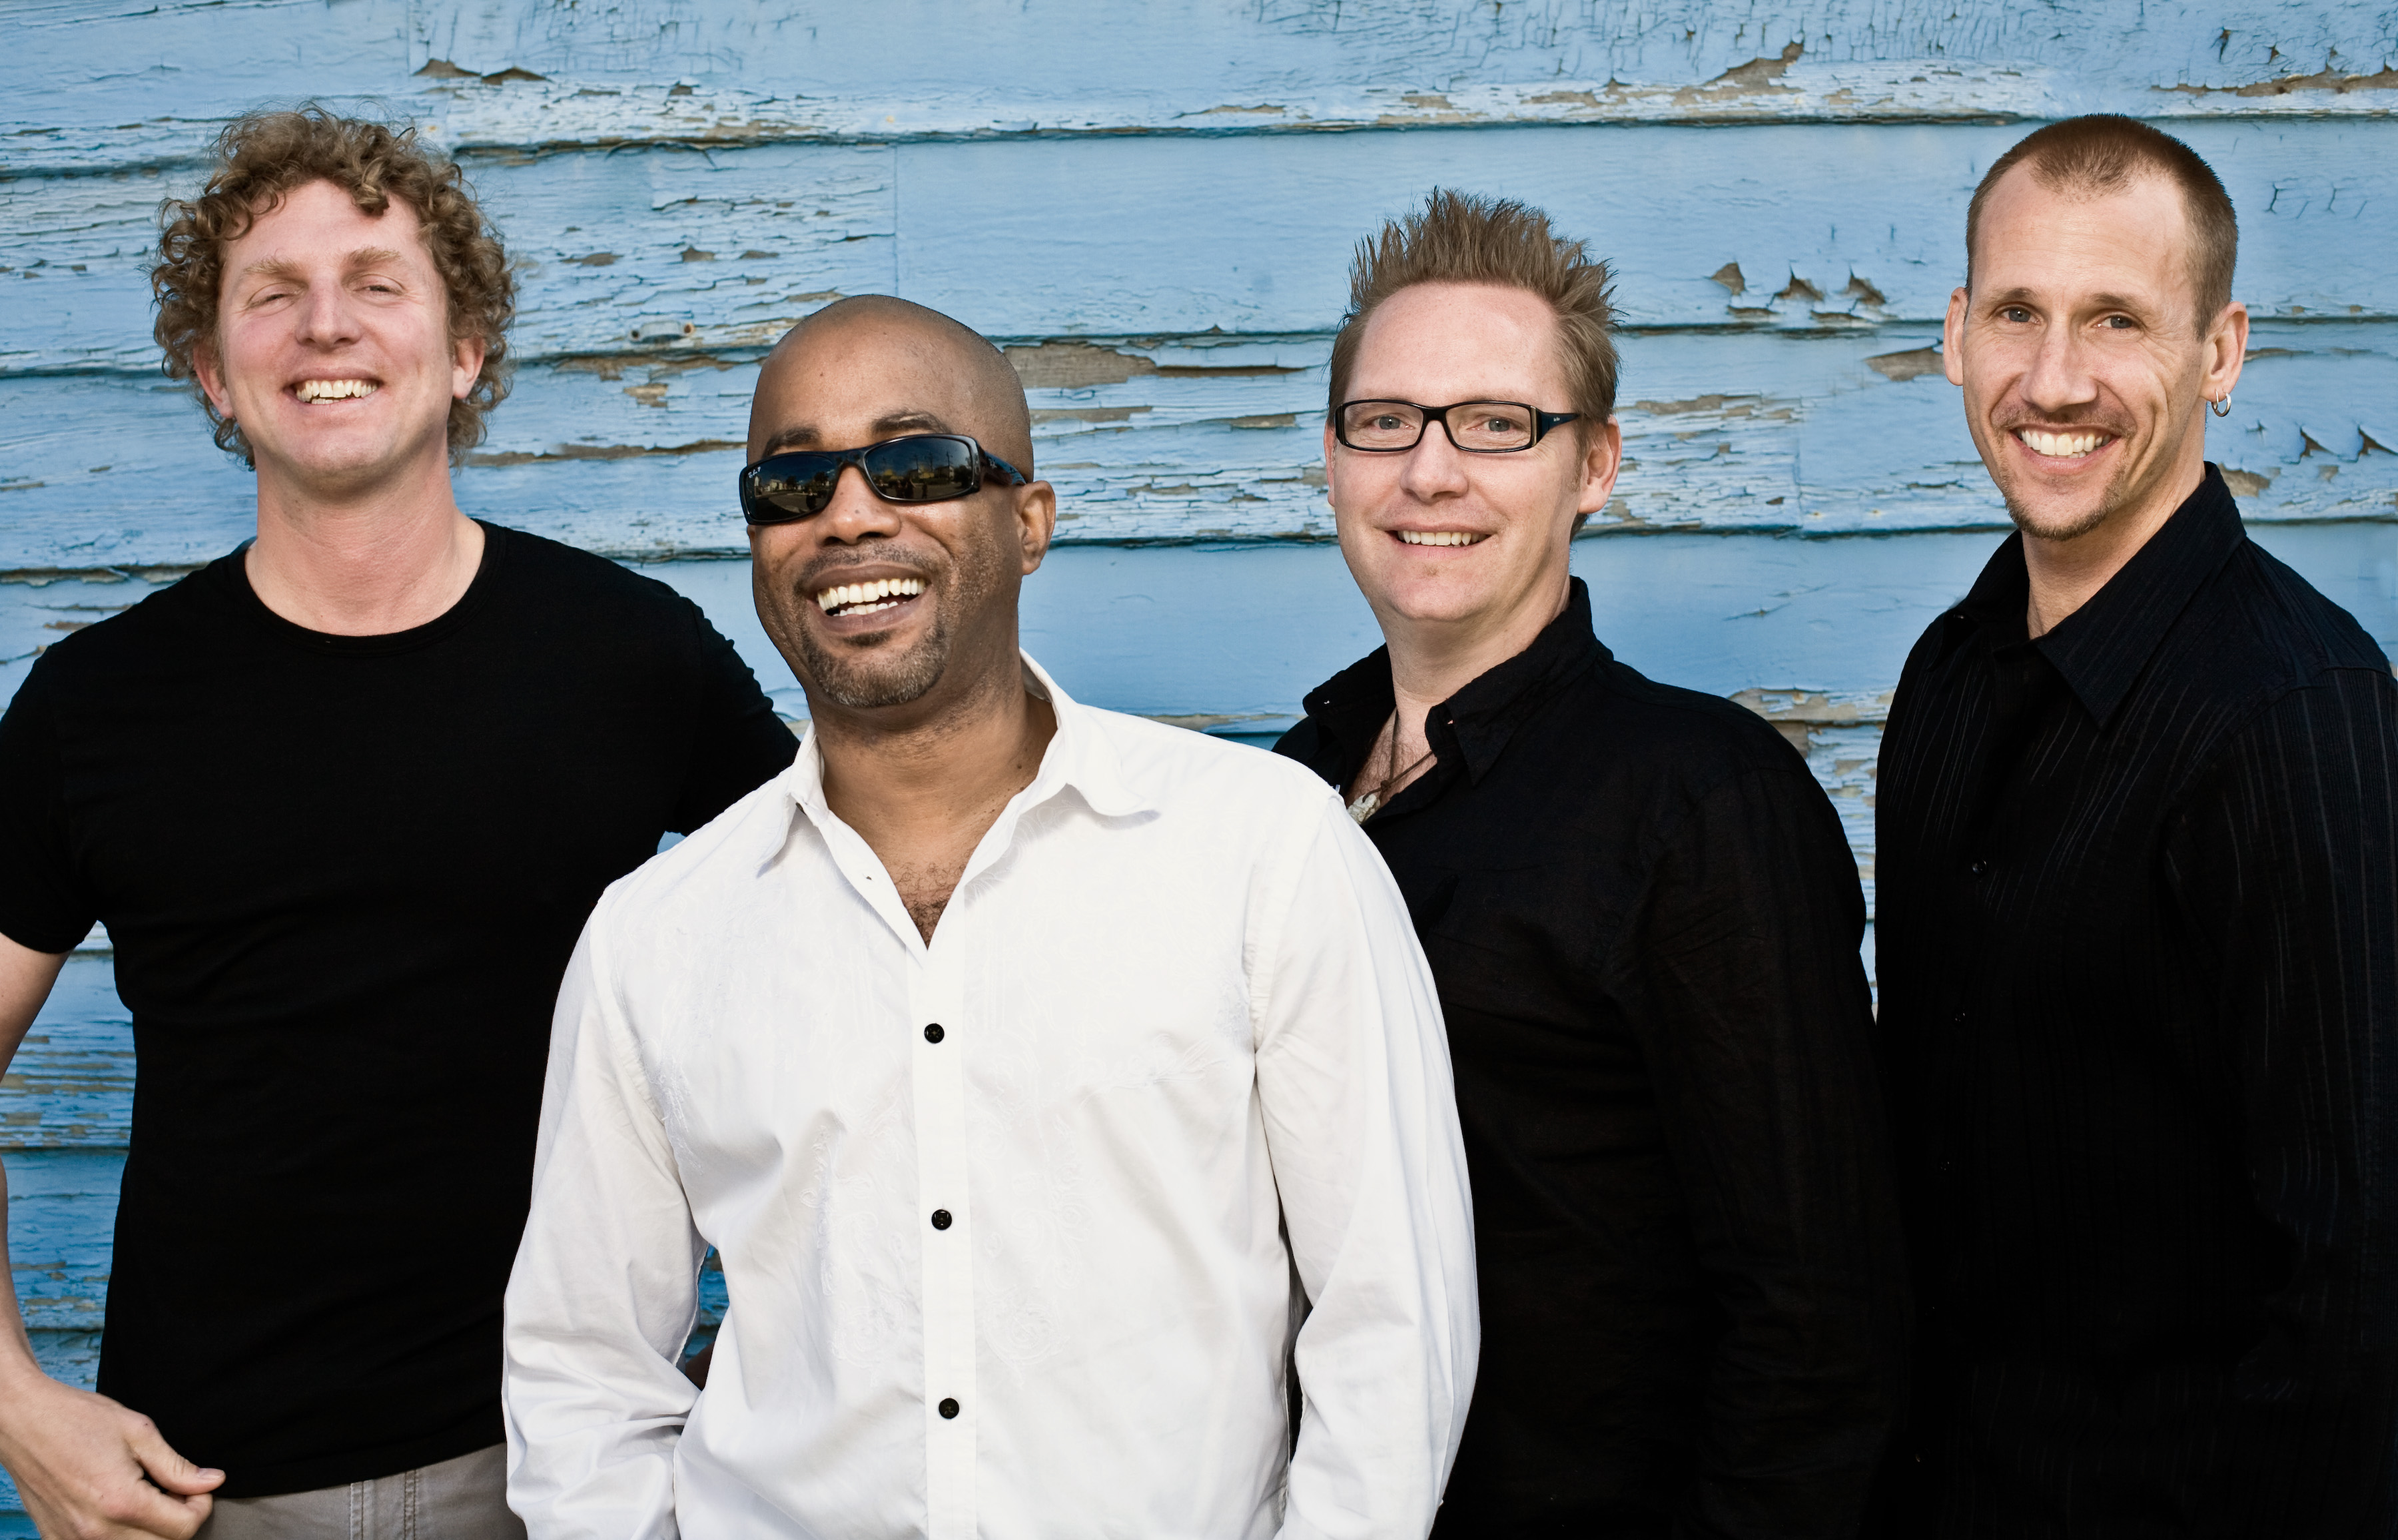 Amazing Hootie And The Blowfish Pictures & Backgrounds. 